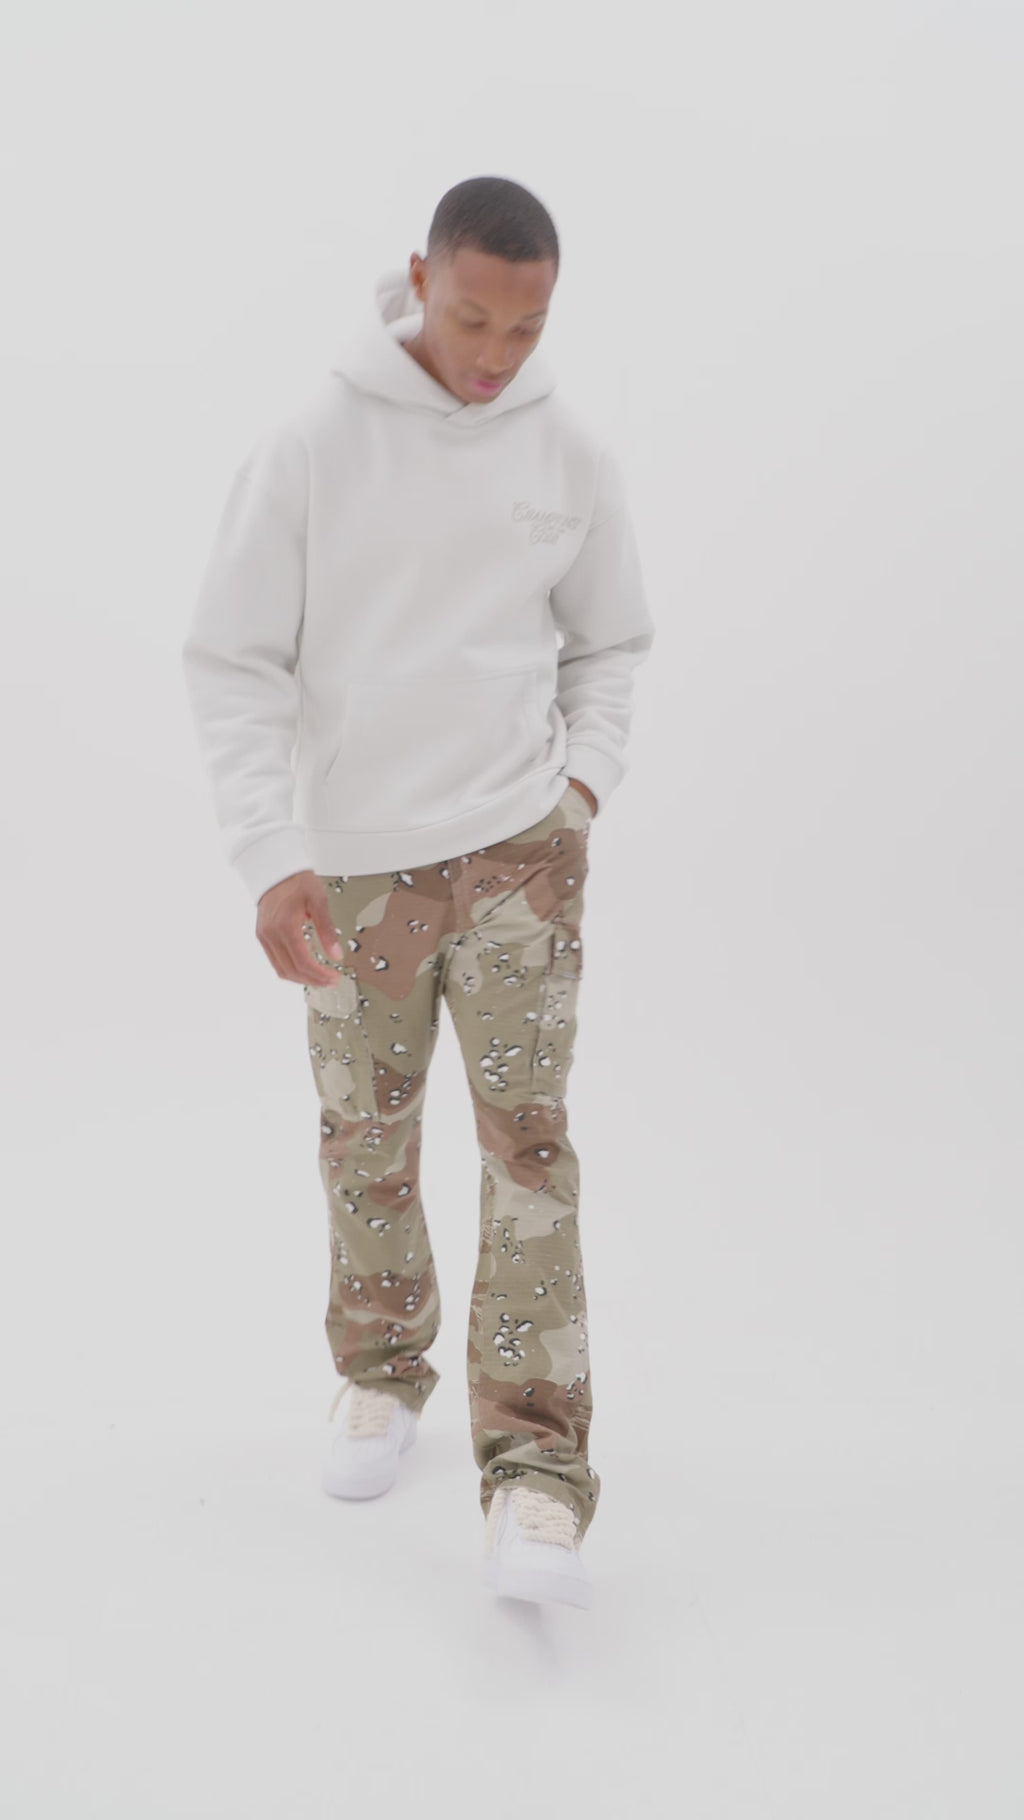 GENERAL CARGO FLARE PANT - CAMO